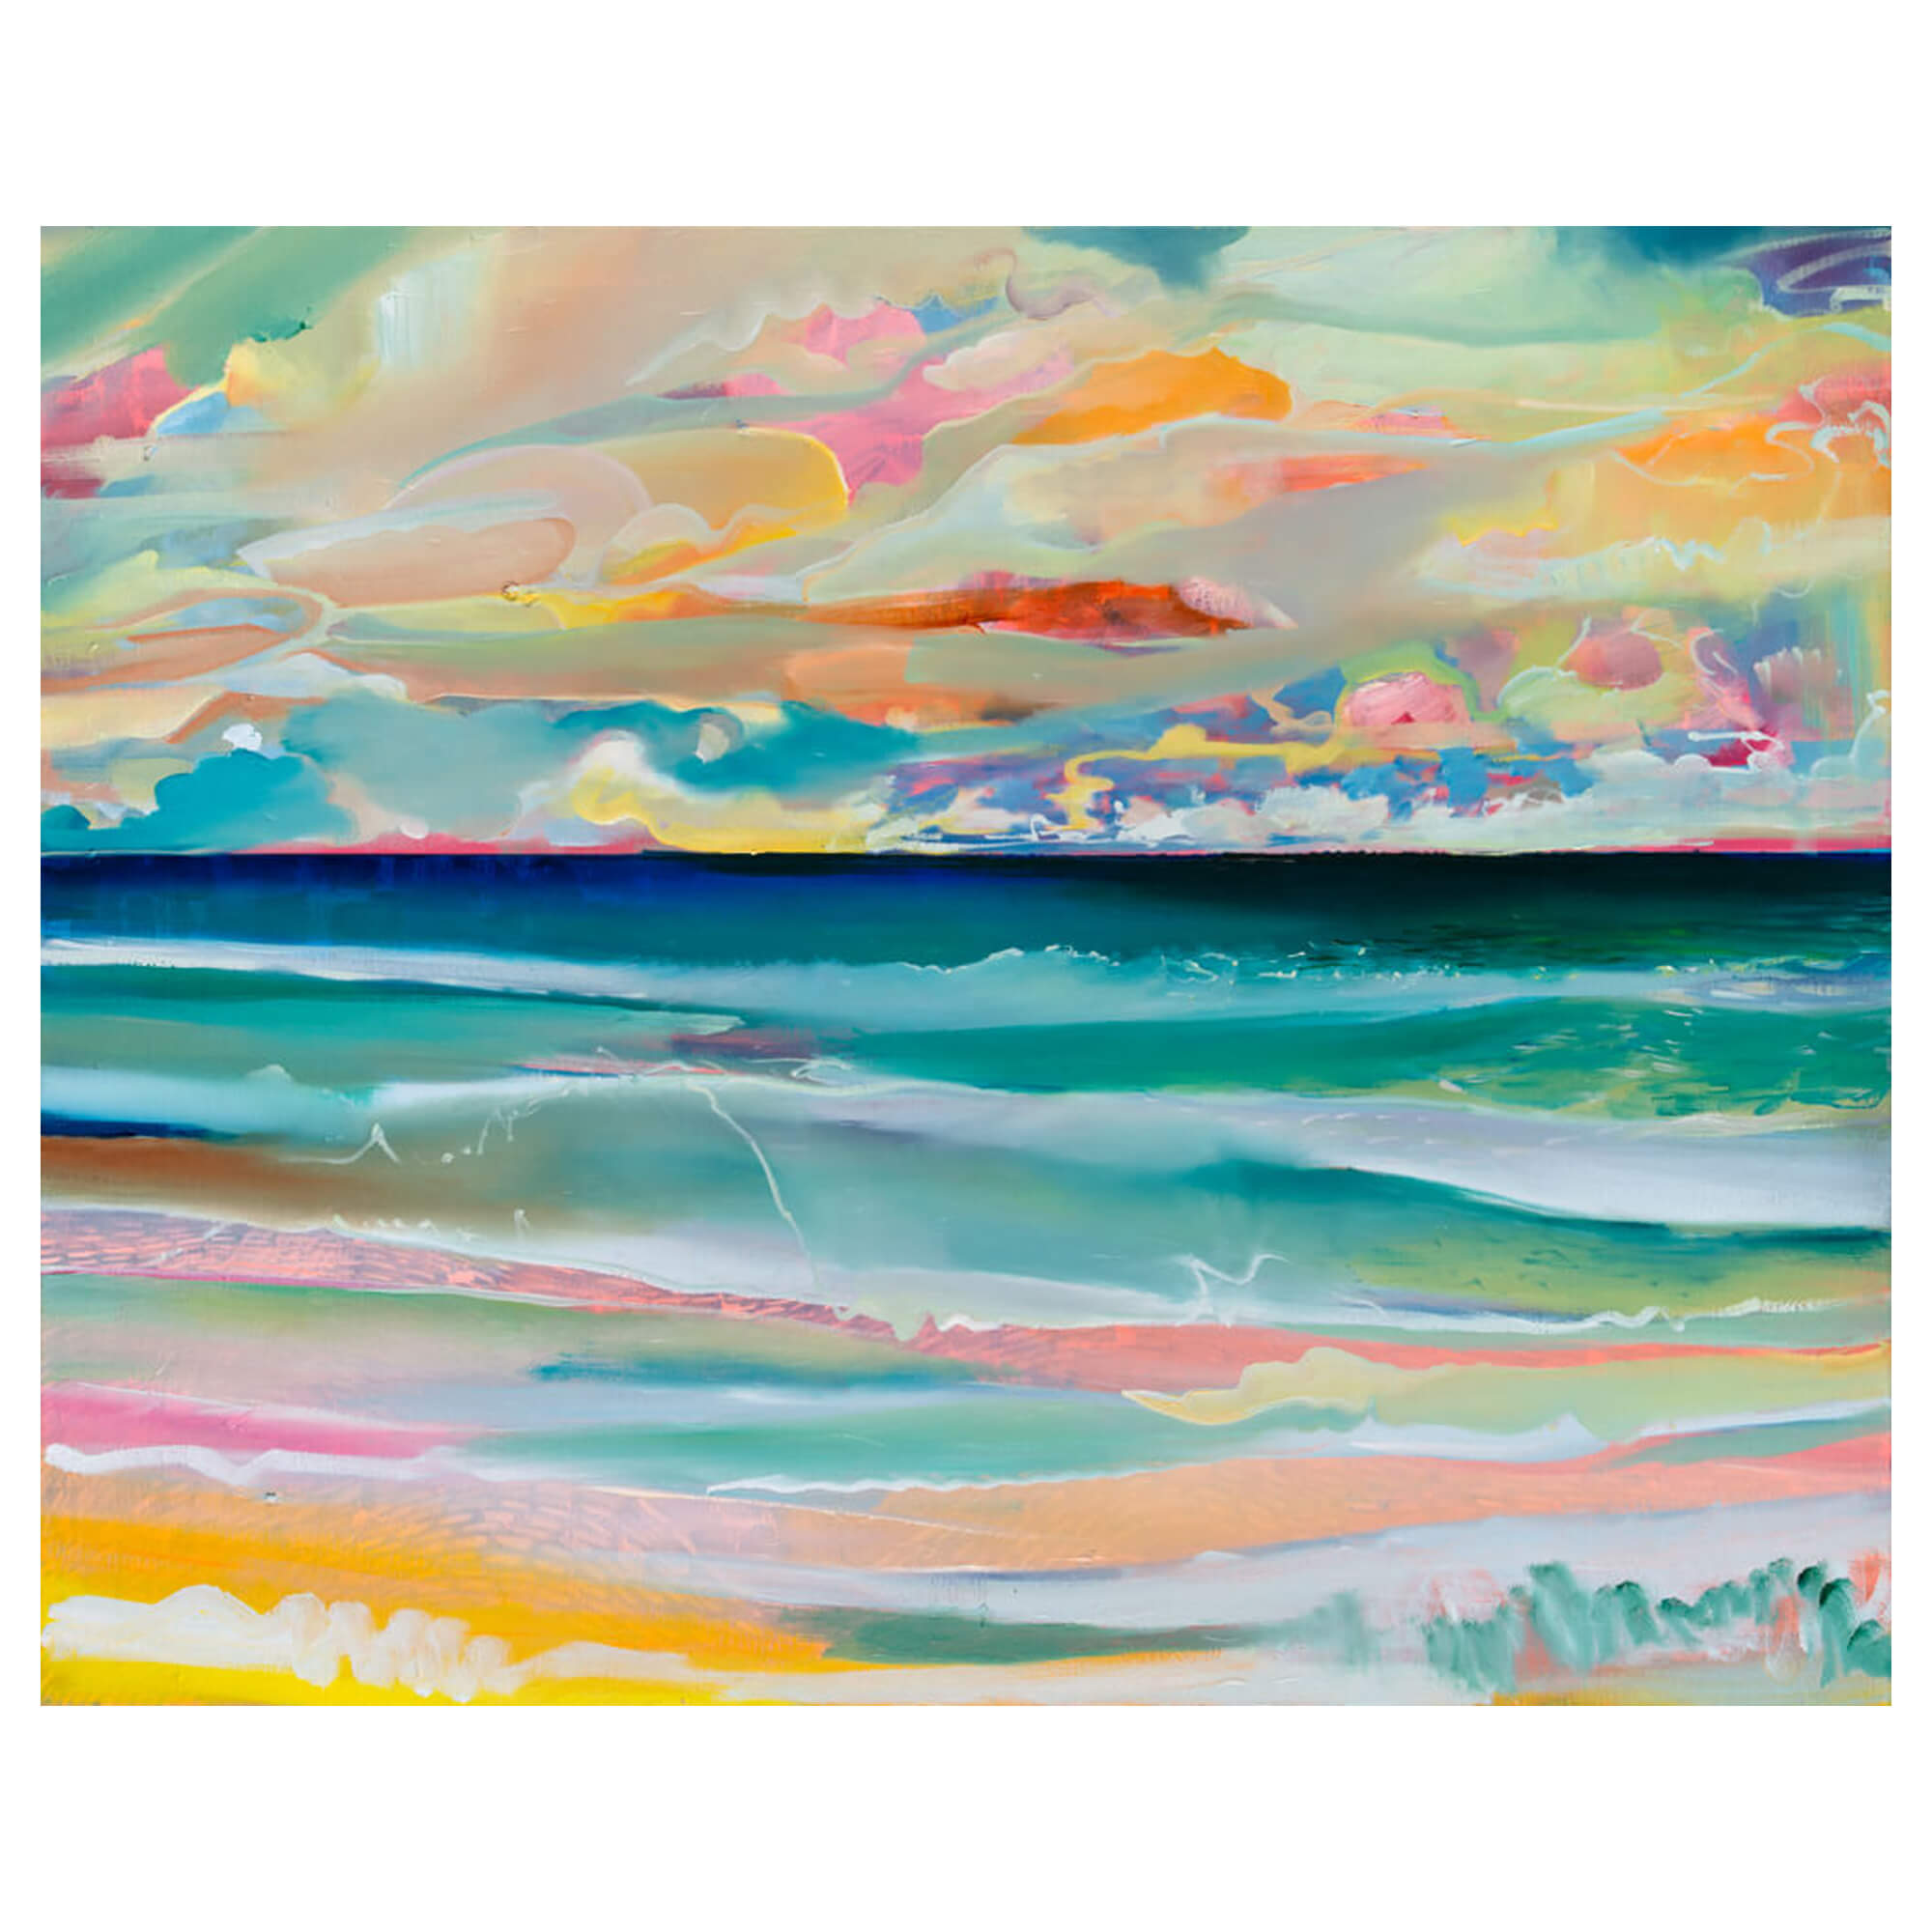 A paper art print of an abstract artwork of a seascape with pink, yellow and teal hues by Hawaii artist Saumolia Puapuaga